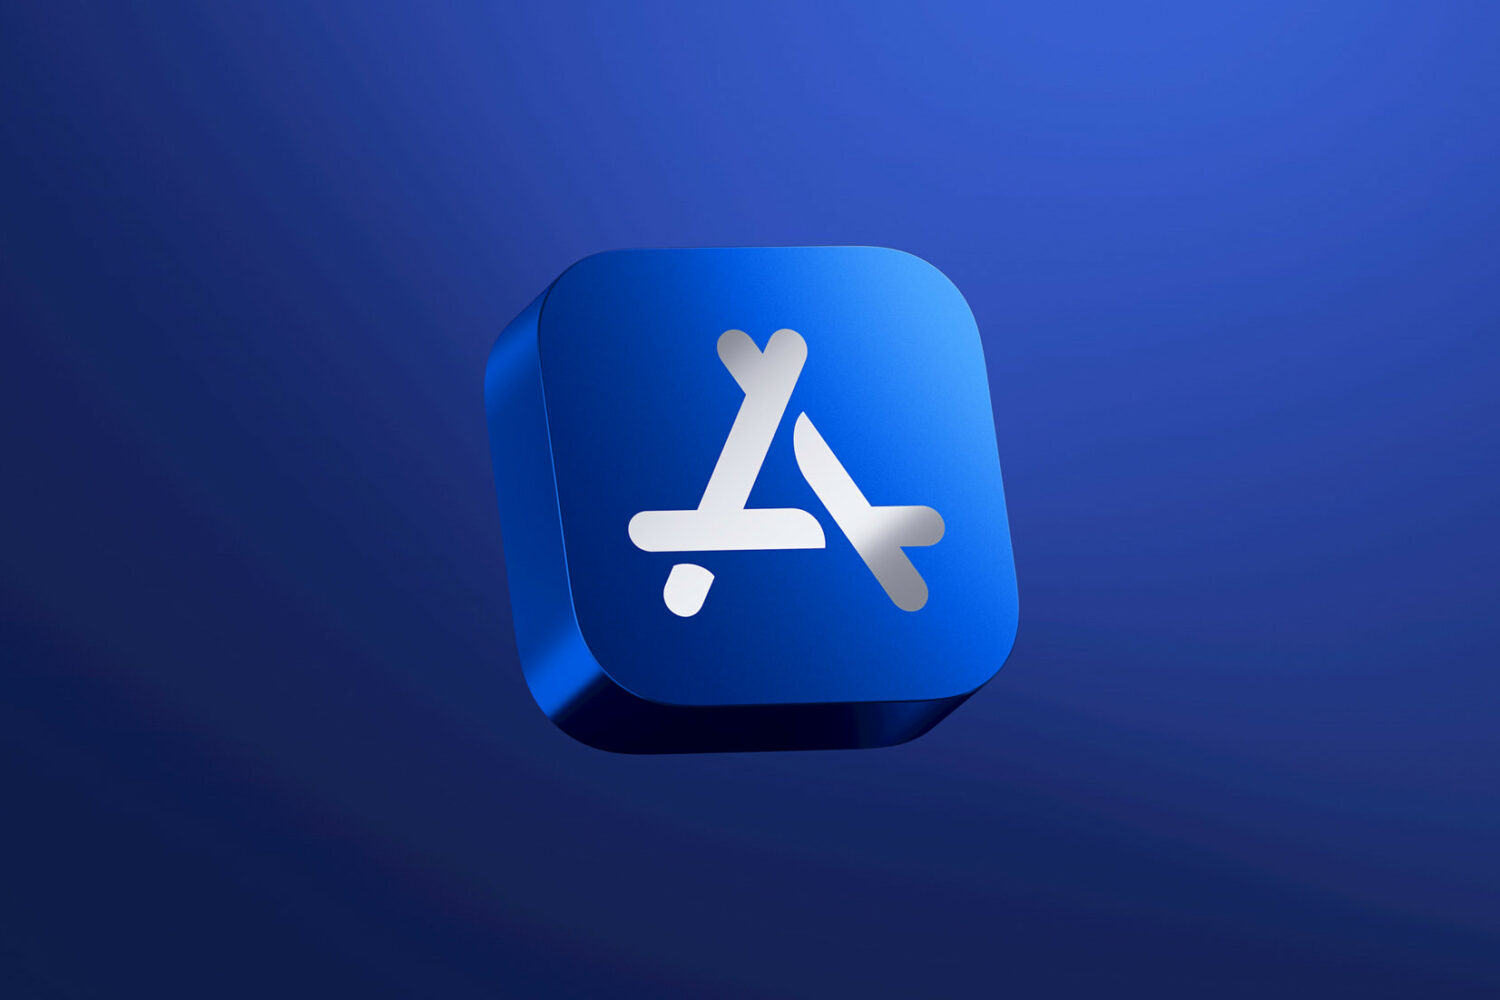 Apple's marketing image showing a 3D icon for the App Store set against a blue gradient background